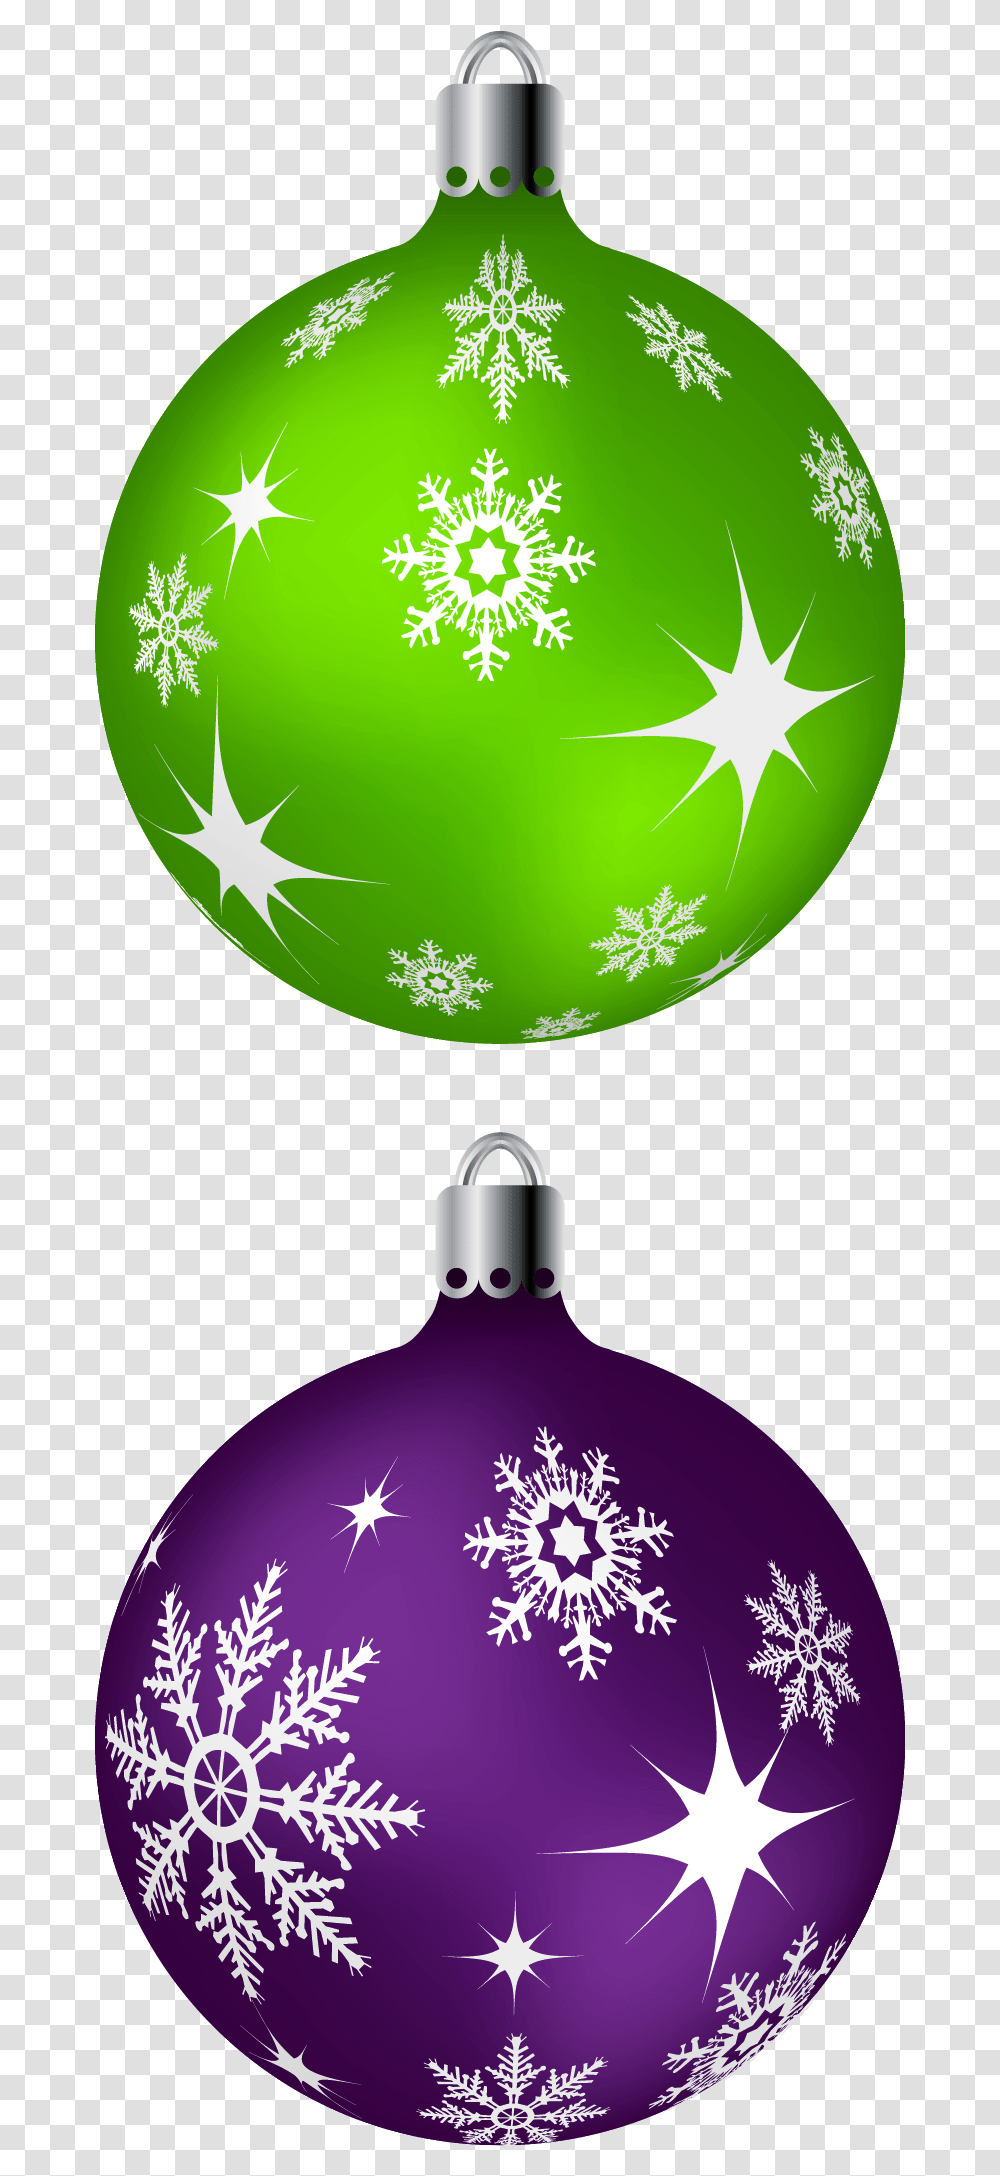 Green And Christmas Balls Christmas Tree Ornaments Cartoon, Lamp, Bottle, Lighting, Ceiling Light Transparent Png